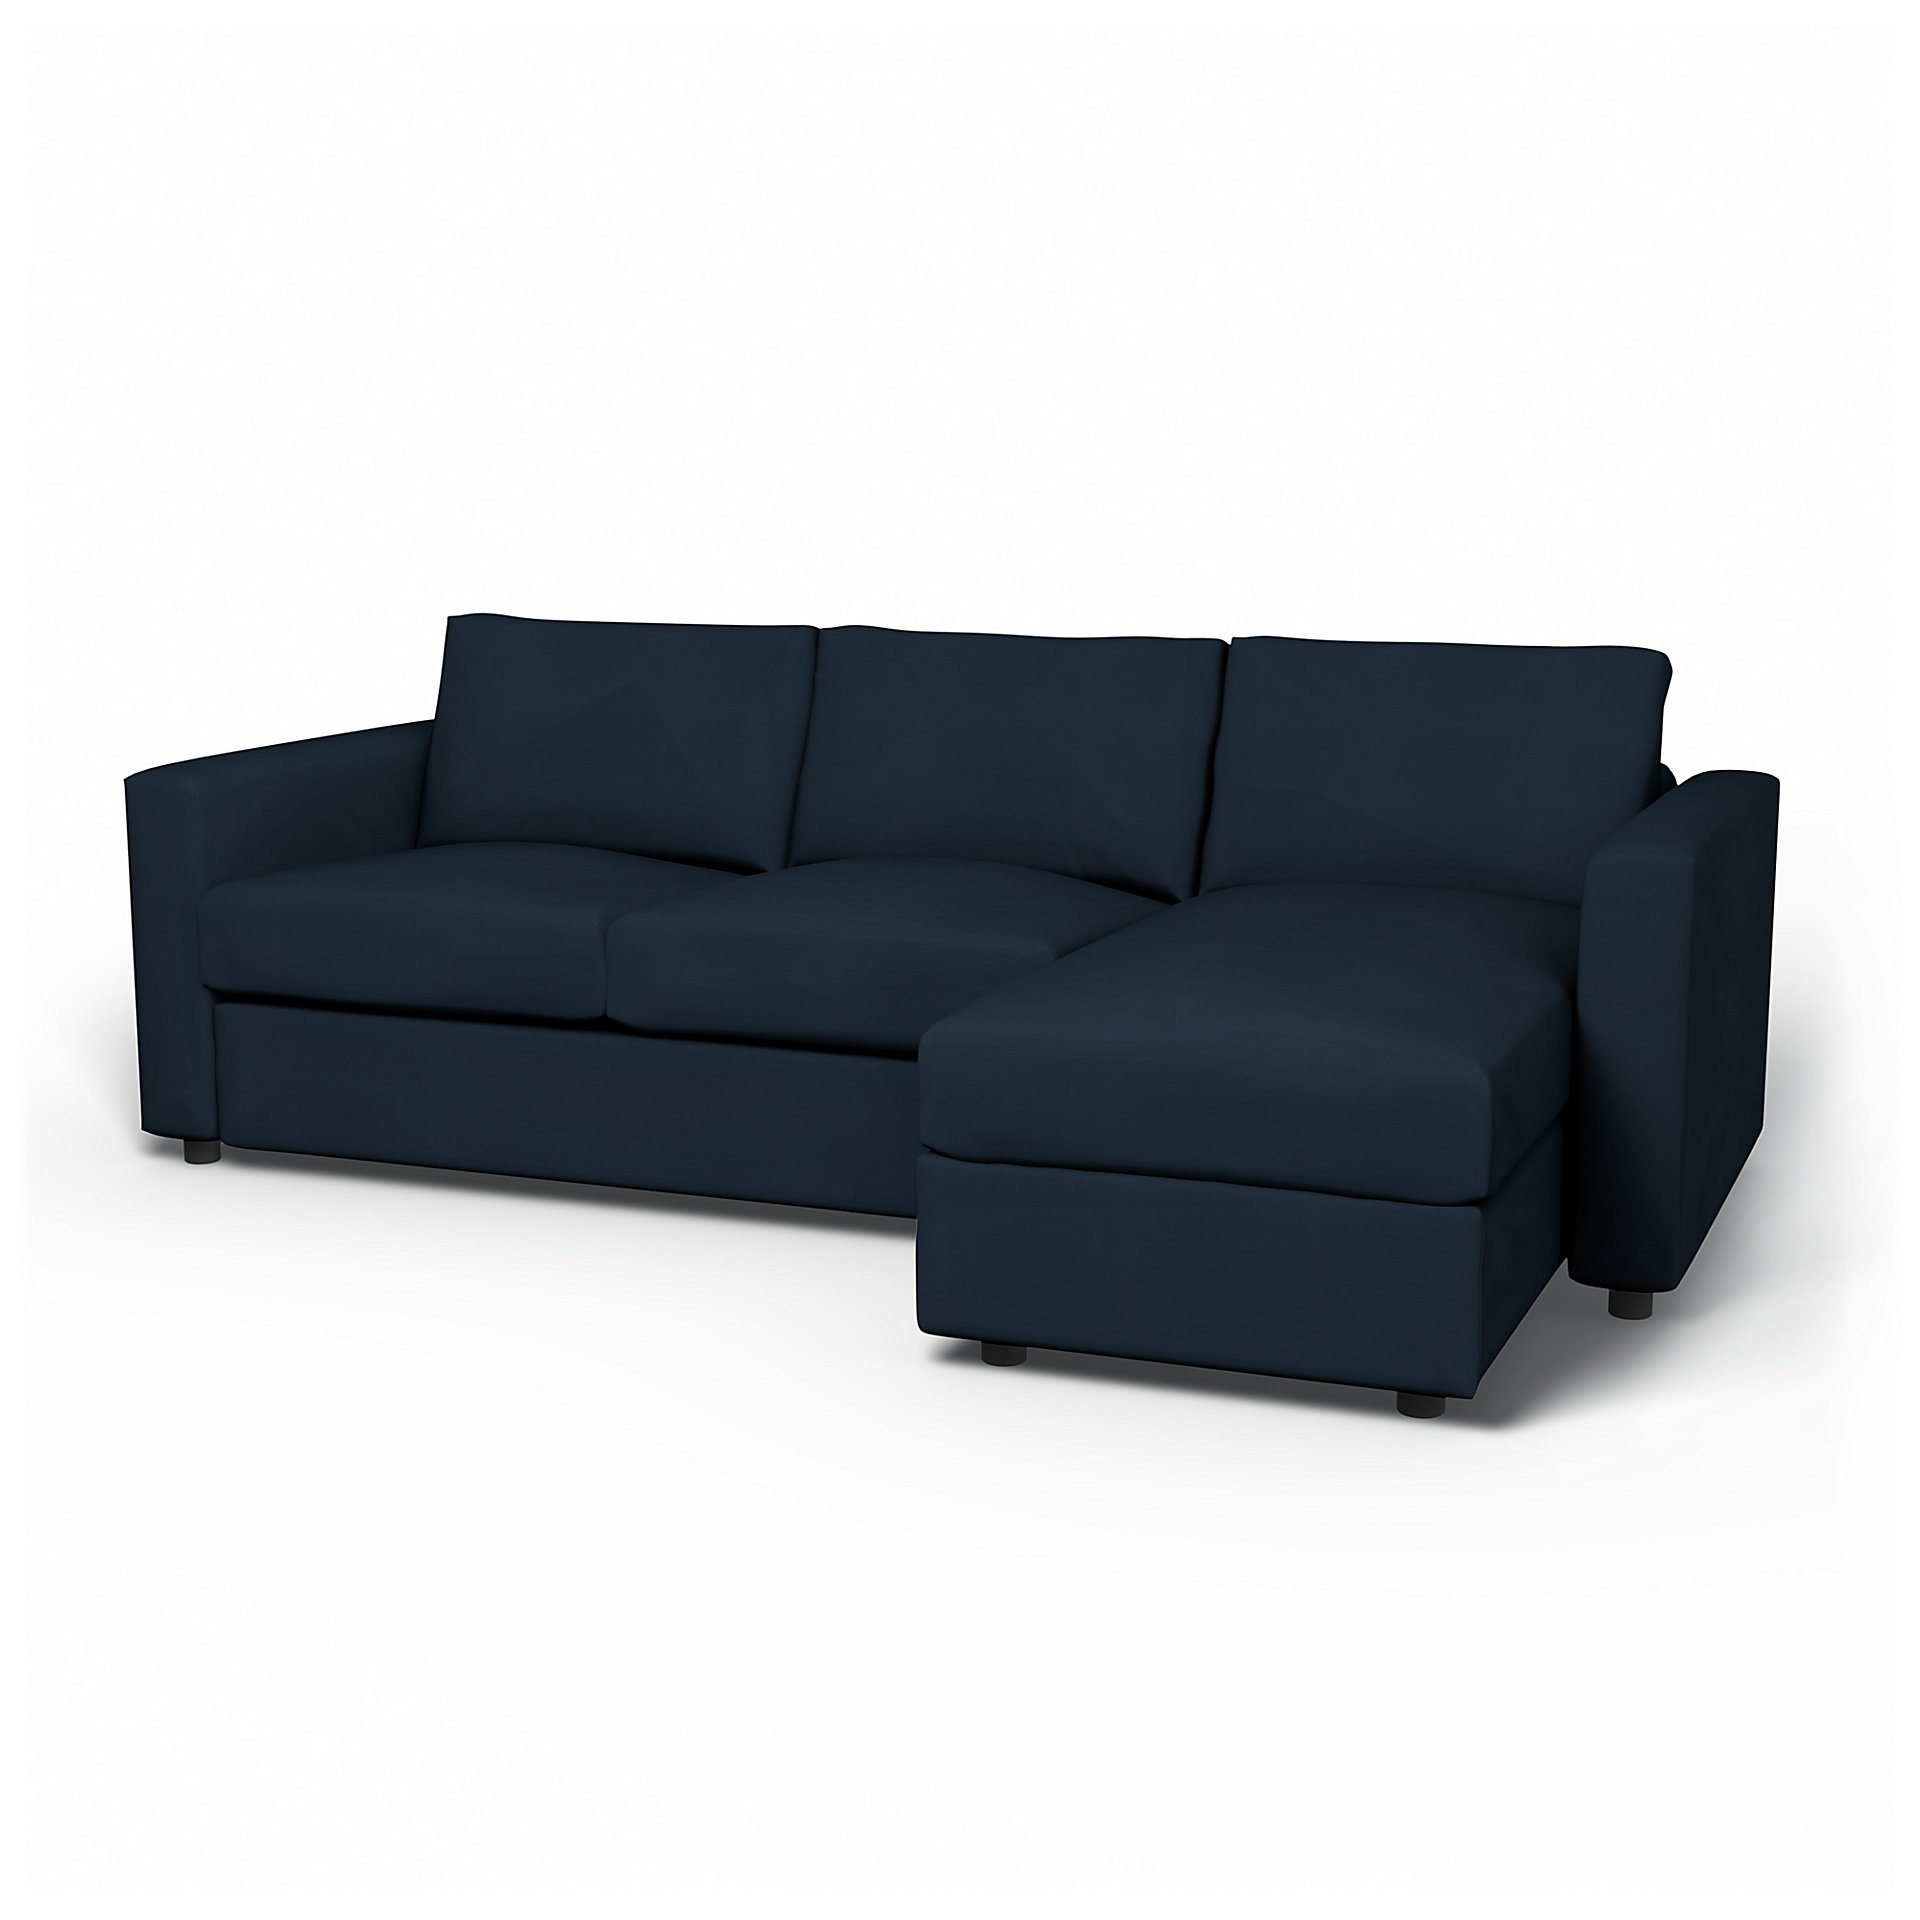 IKEA - Vimle 2 Seater Sofa with Chaise Cover, Navy Blue, Cotton - Bemz